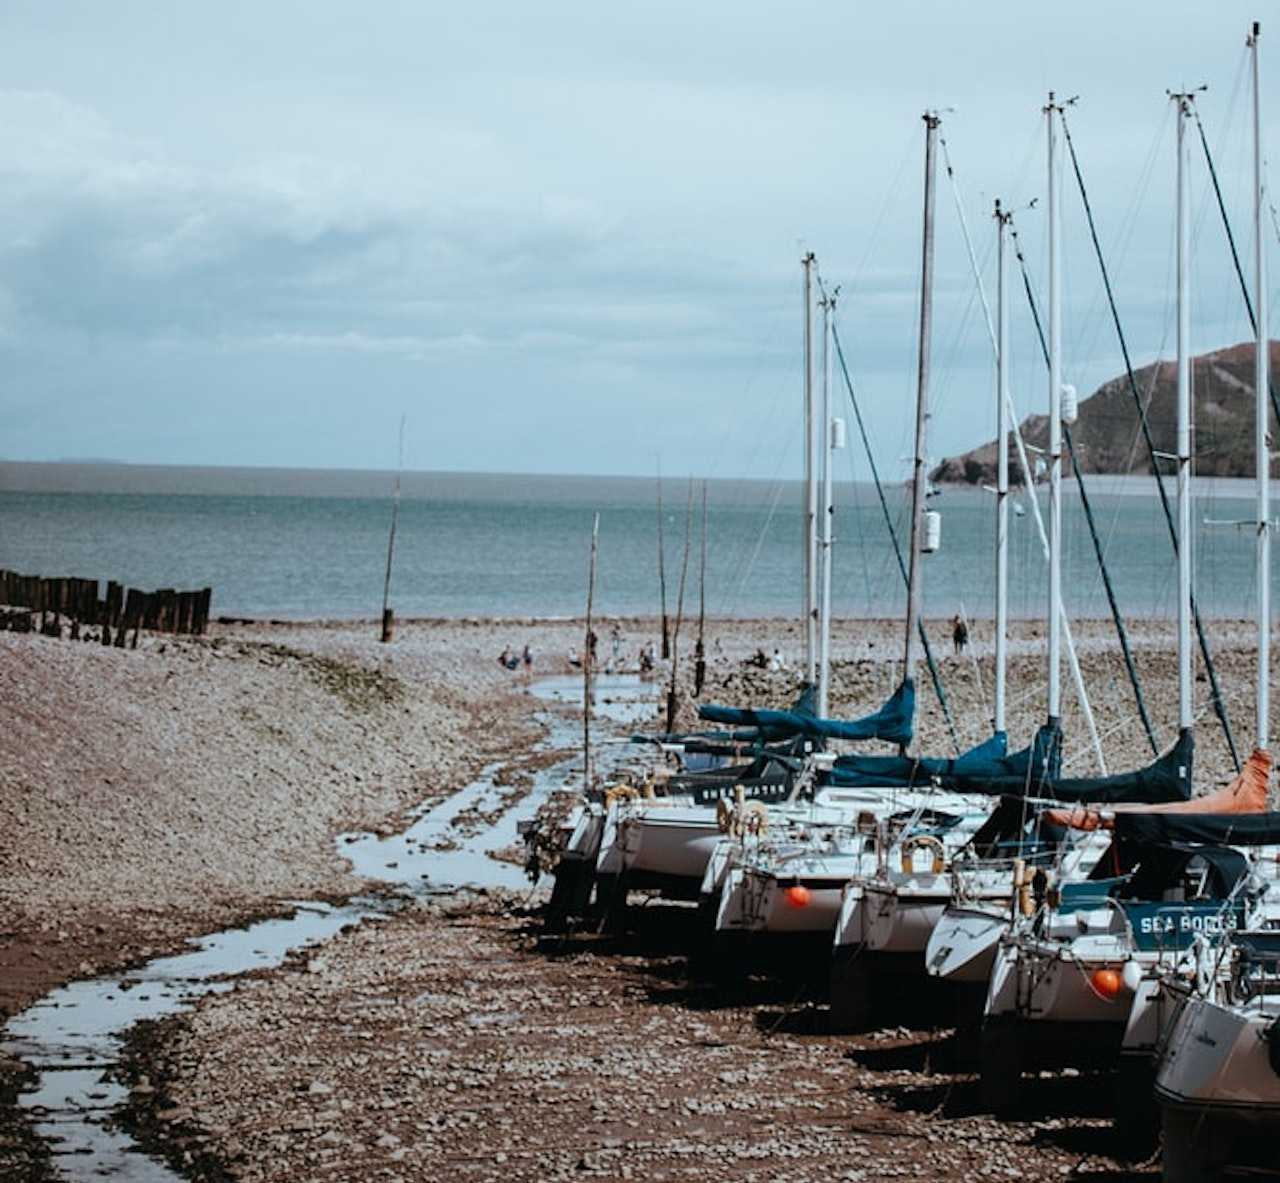 Boats are lined up at Porlock Weir